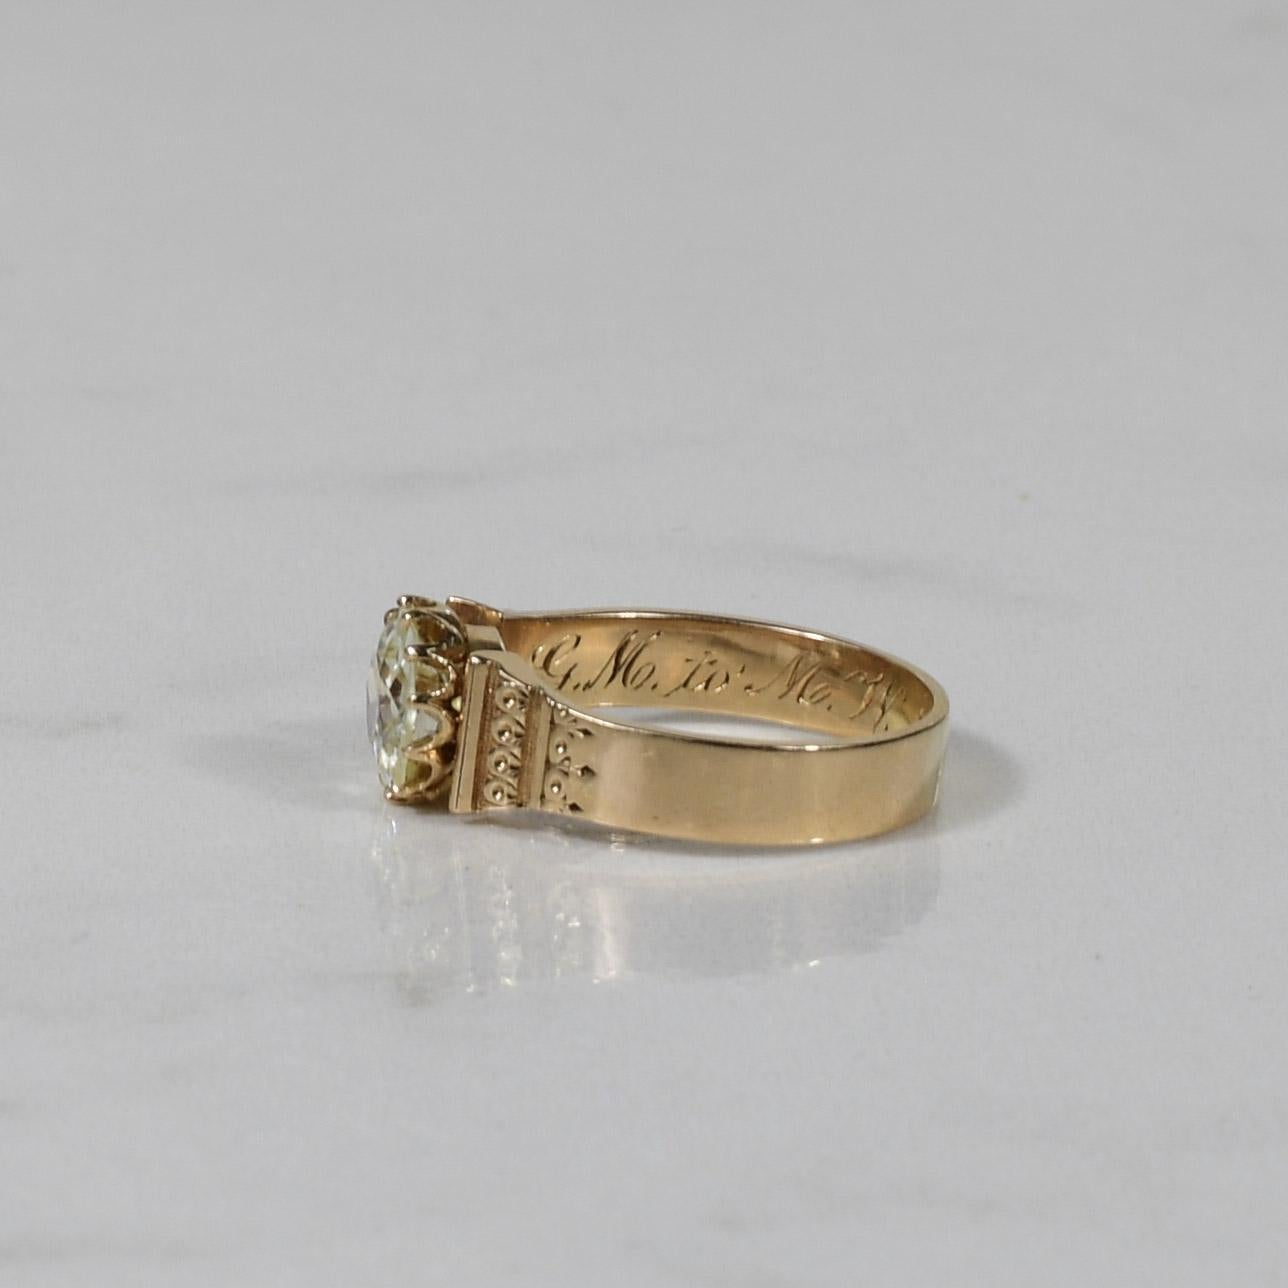 Victorian 1.71ct Diamond Engagement Ring Dated 1896 In Good Condition For Sale In Addison, TX